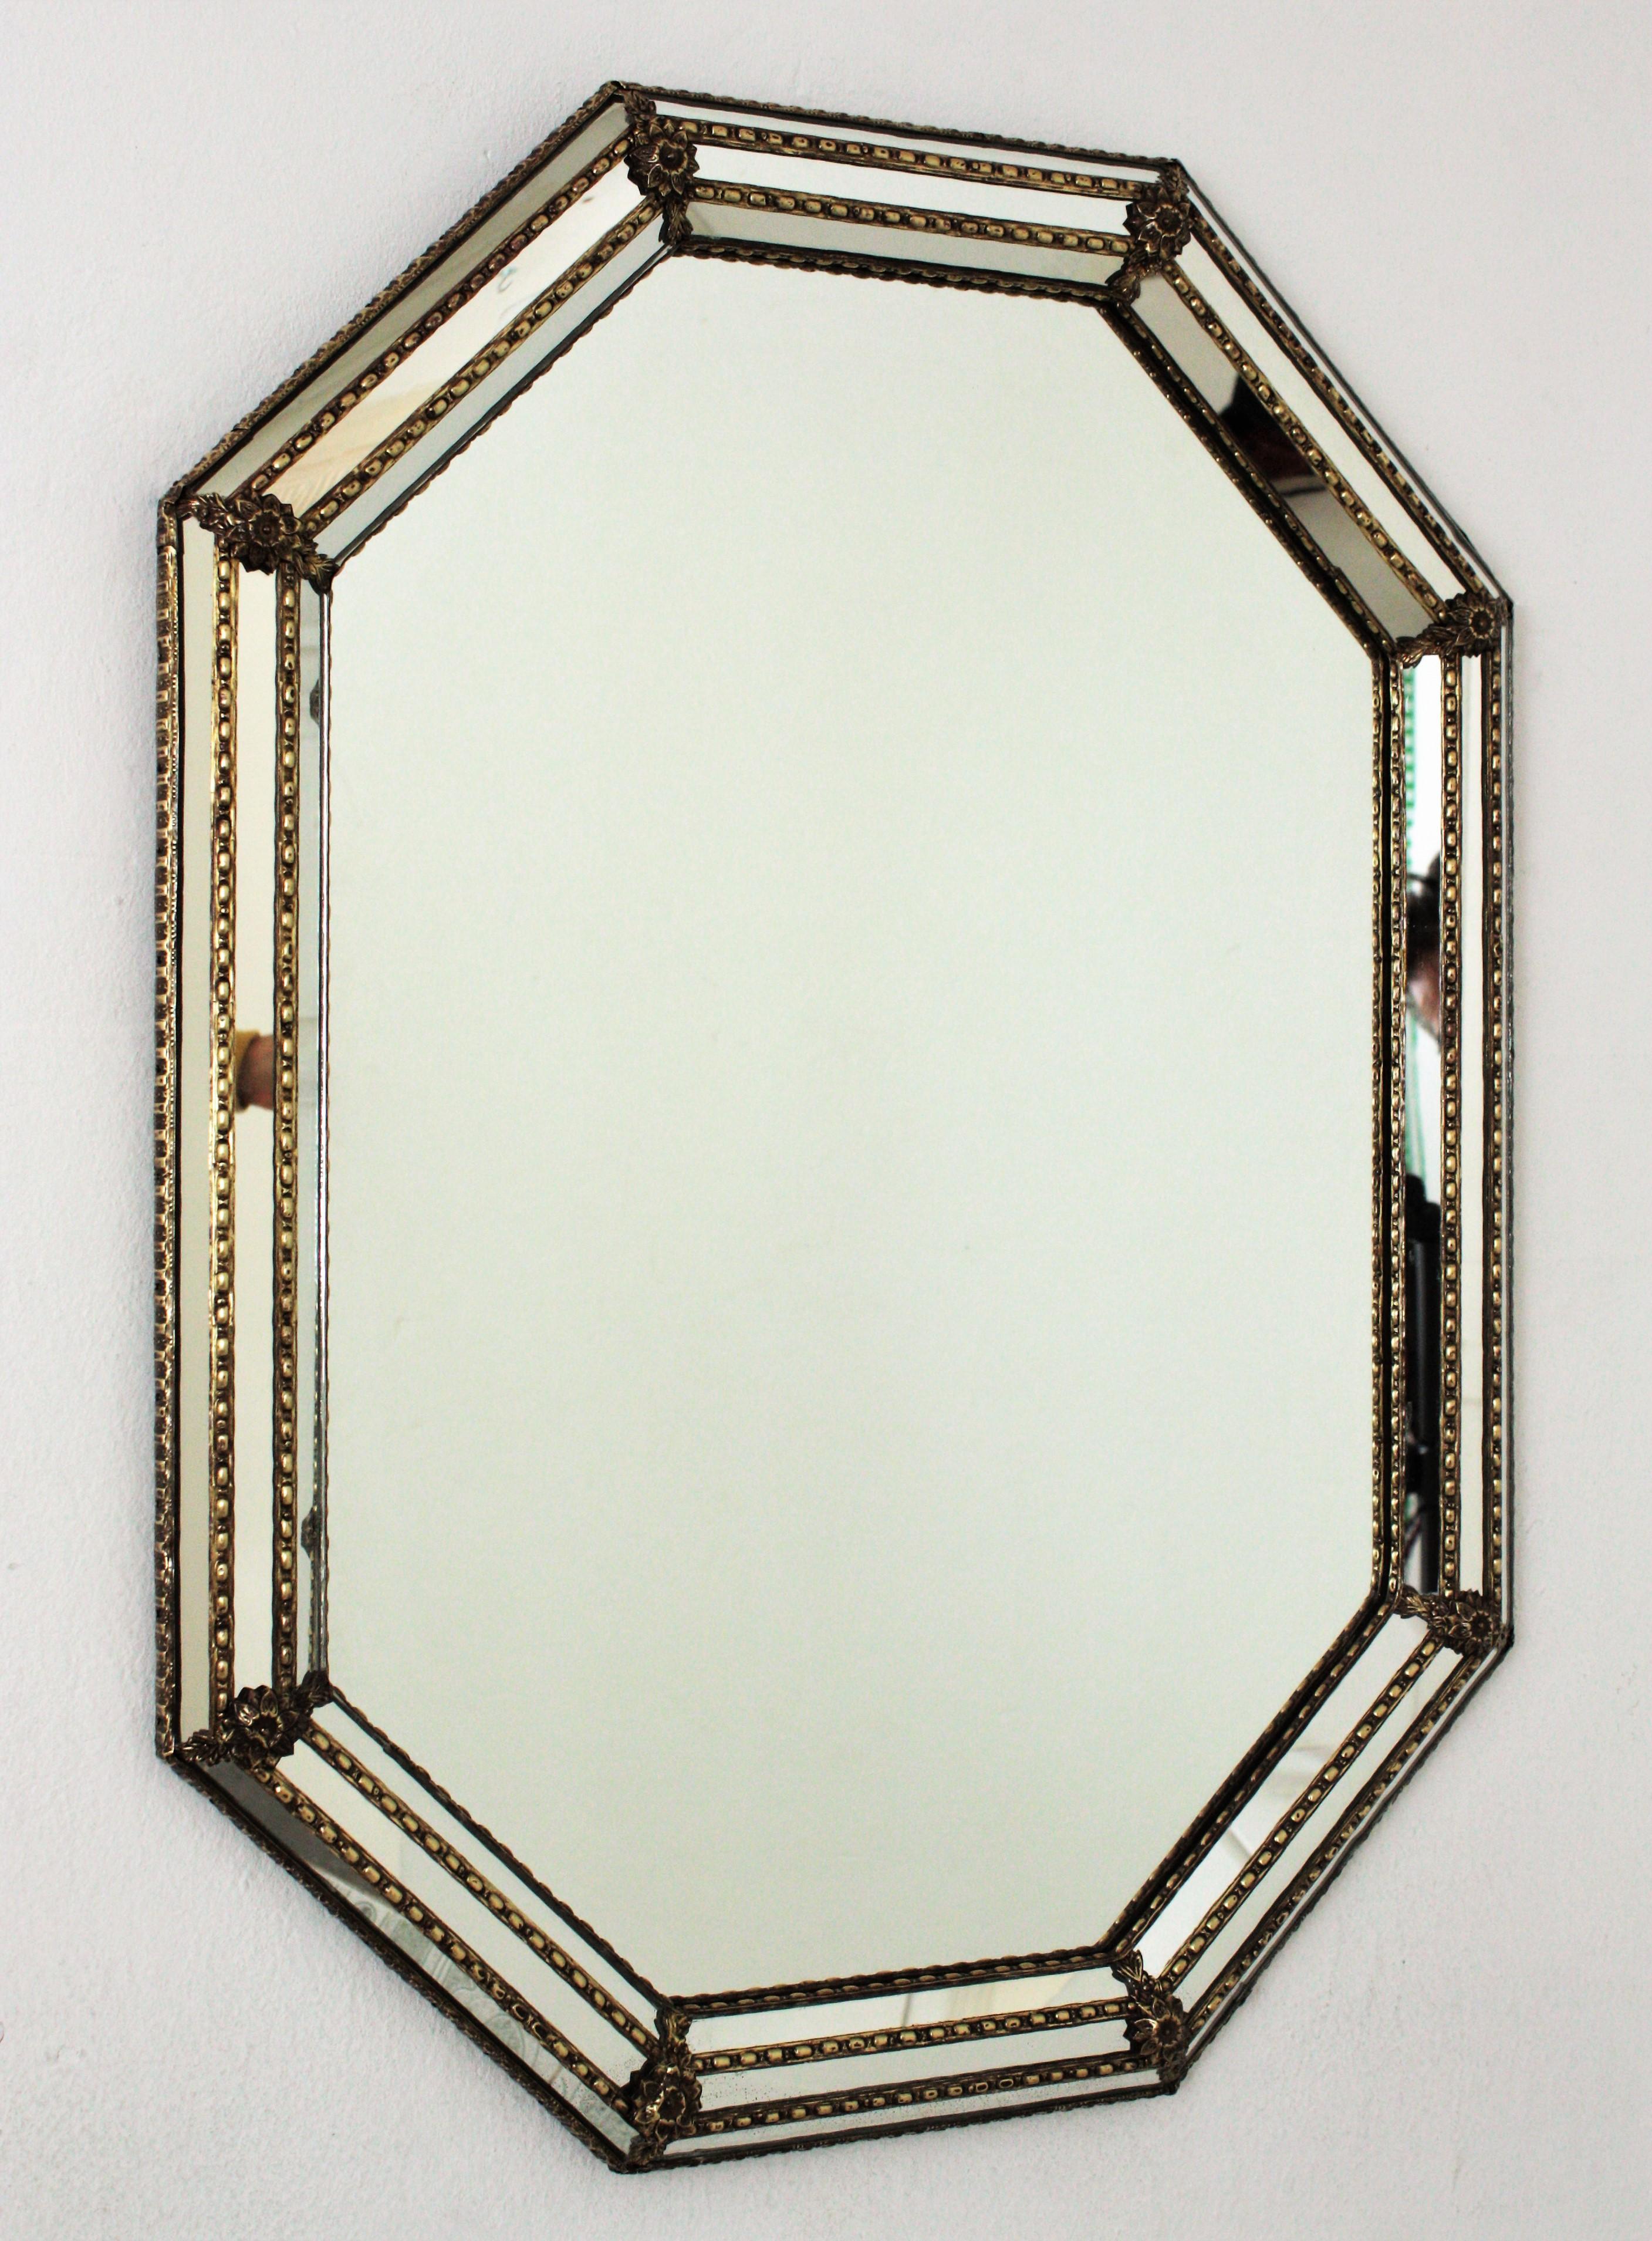 Venetian style octagonal wall mirror with gilt metal accents, Spain, 1950s
This octagonal mirror has a triple mirror frame. The mirrored panels are adorned by metal patterns and flowers.
This wall mirror will be perfect in a contemporary or